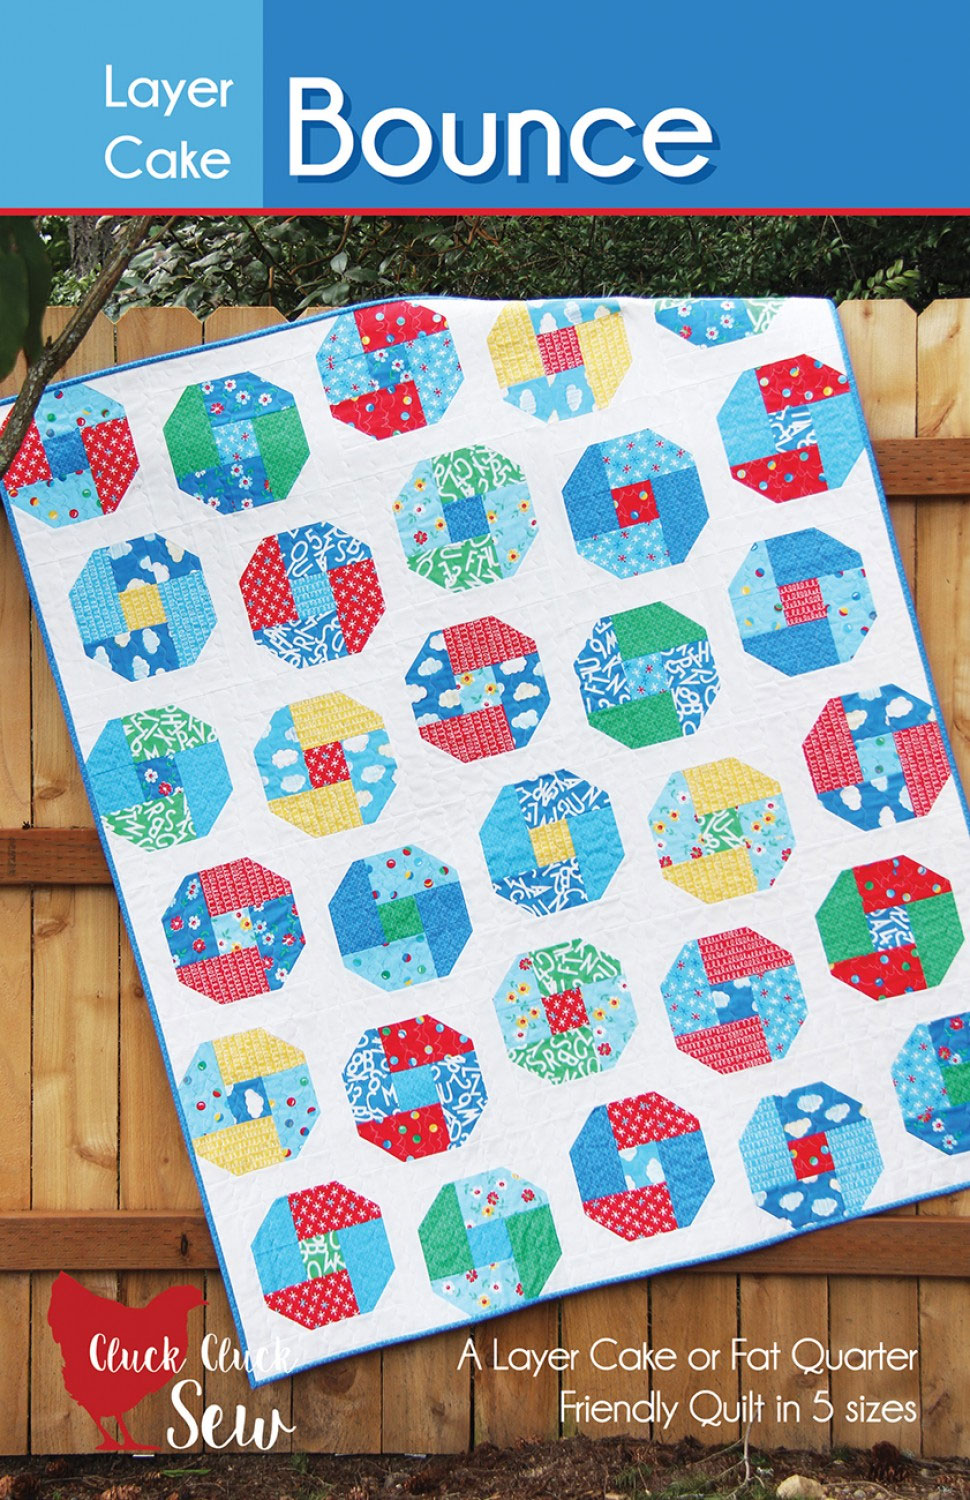 Layer-Cake-Bounce-quilt-sewing-pattern-Cluck-Cluck-Sew-front